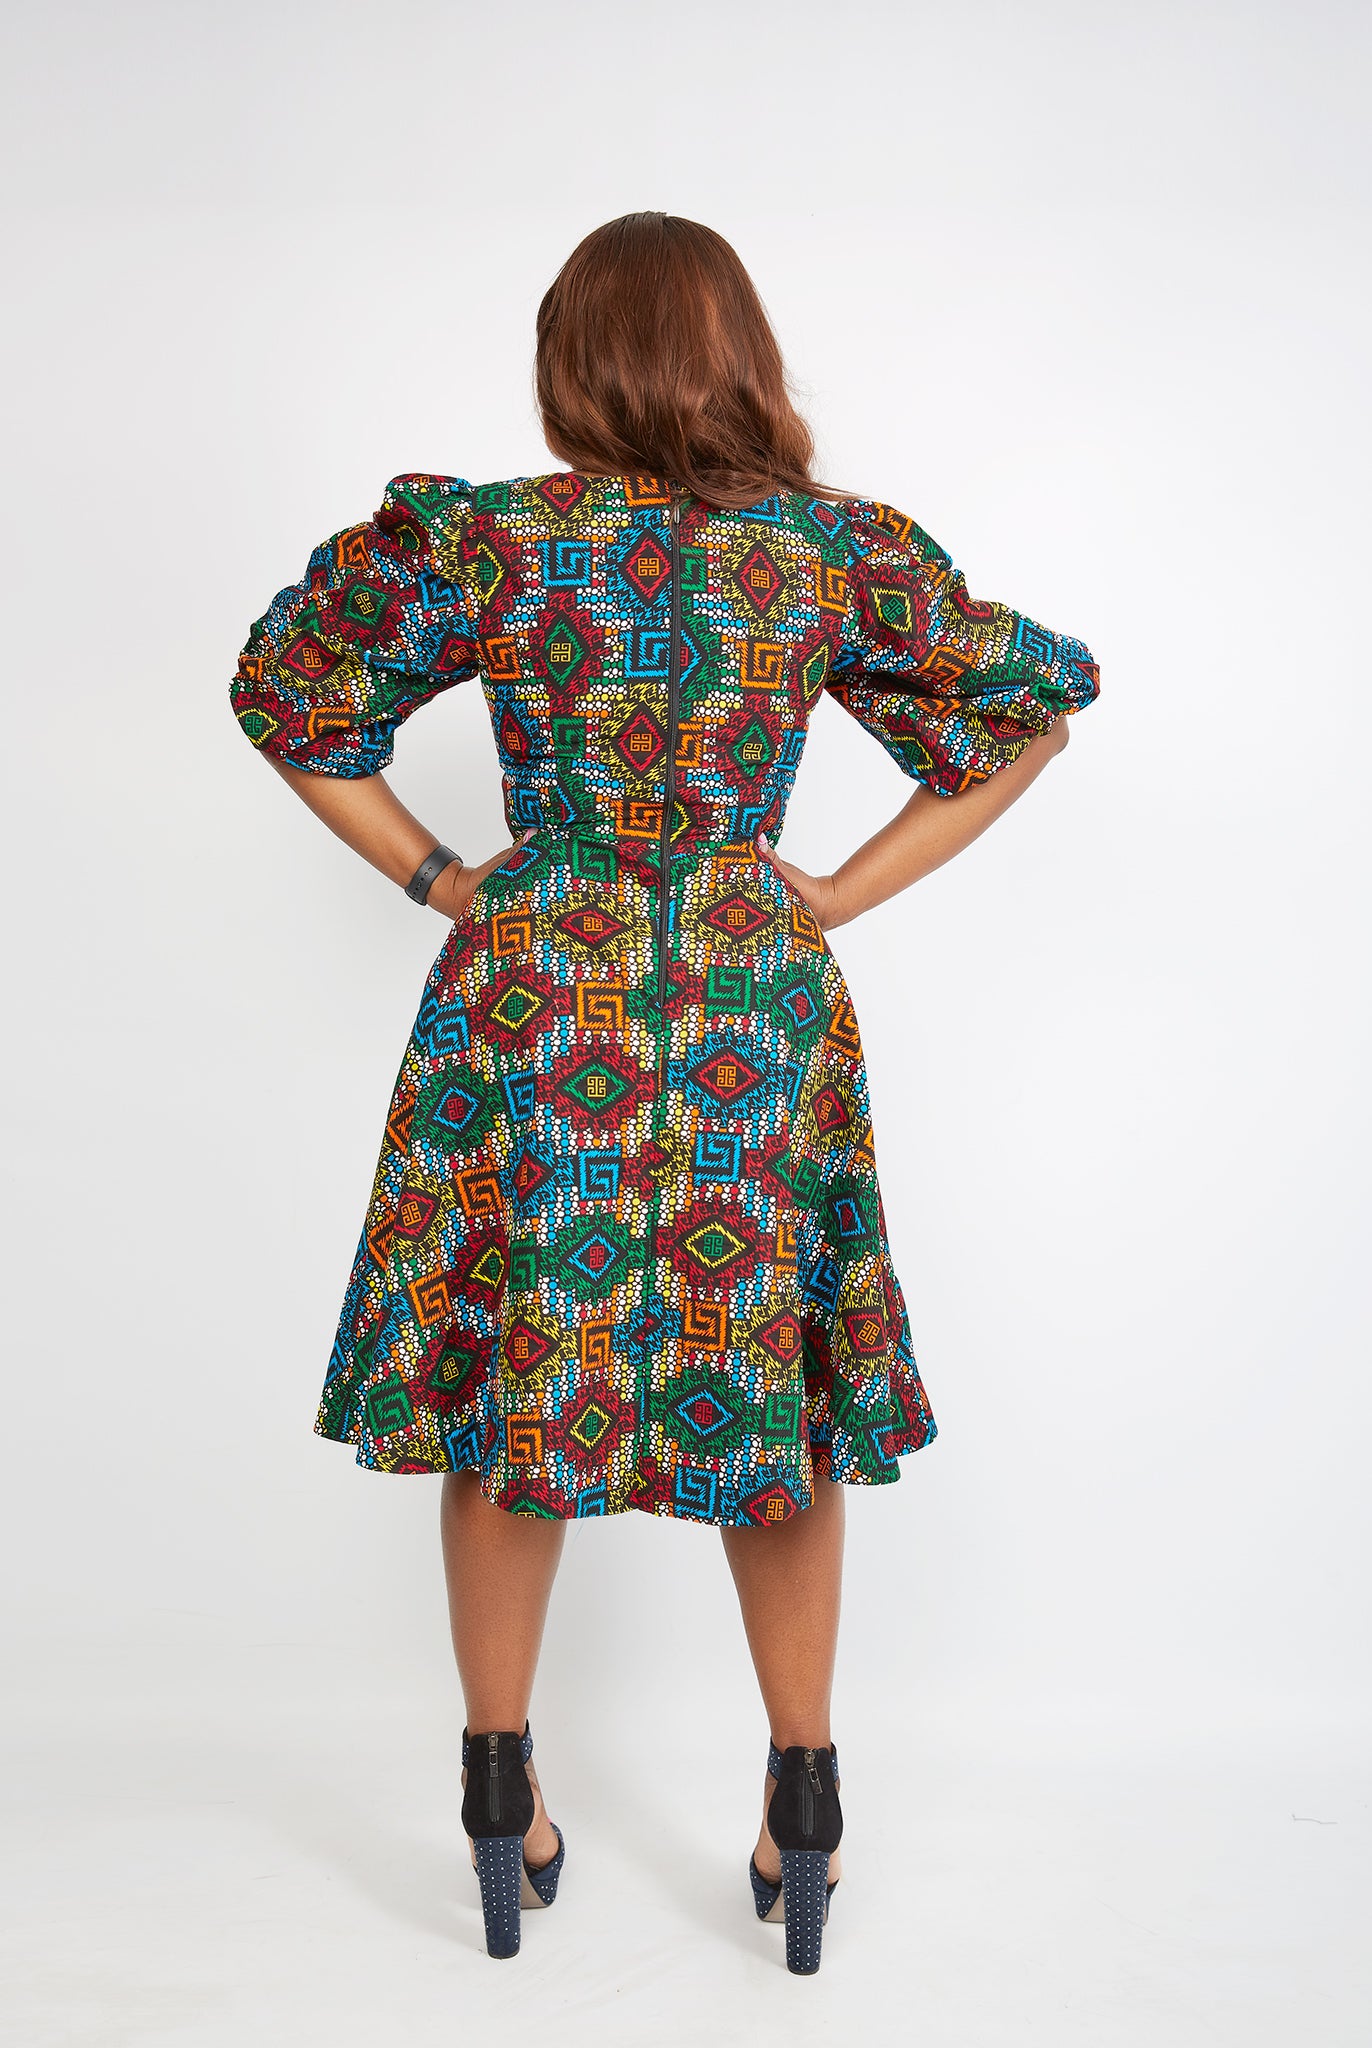 African dress for plus size women | African print clothing in the UK | Ready to wear African print outfits | African dress styles | African clothing | african outfit | kitenge dresses | Africa Dresses for Women | Ankara Styles for ladies | African dresses for work | Danshiki Dress|Ghana African dress | Kente Dress | African dress | African print Dress | African Clothing Online  Shop | Short African dress | Mini African dress UK | African  dress UK